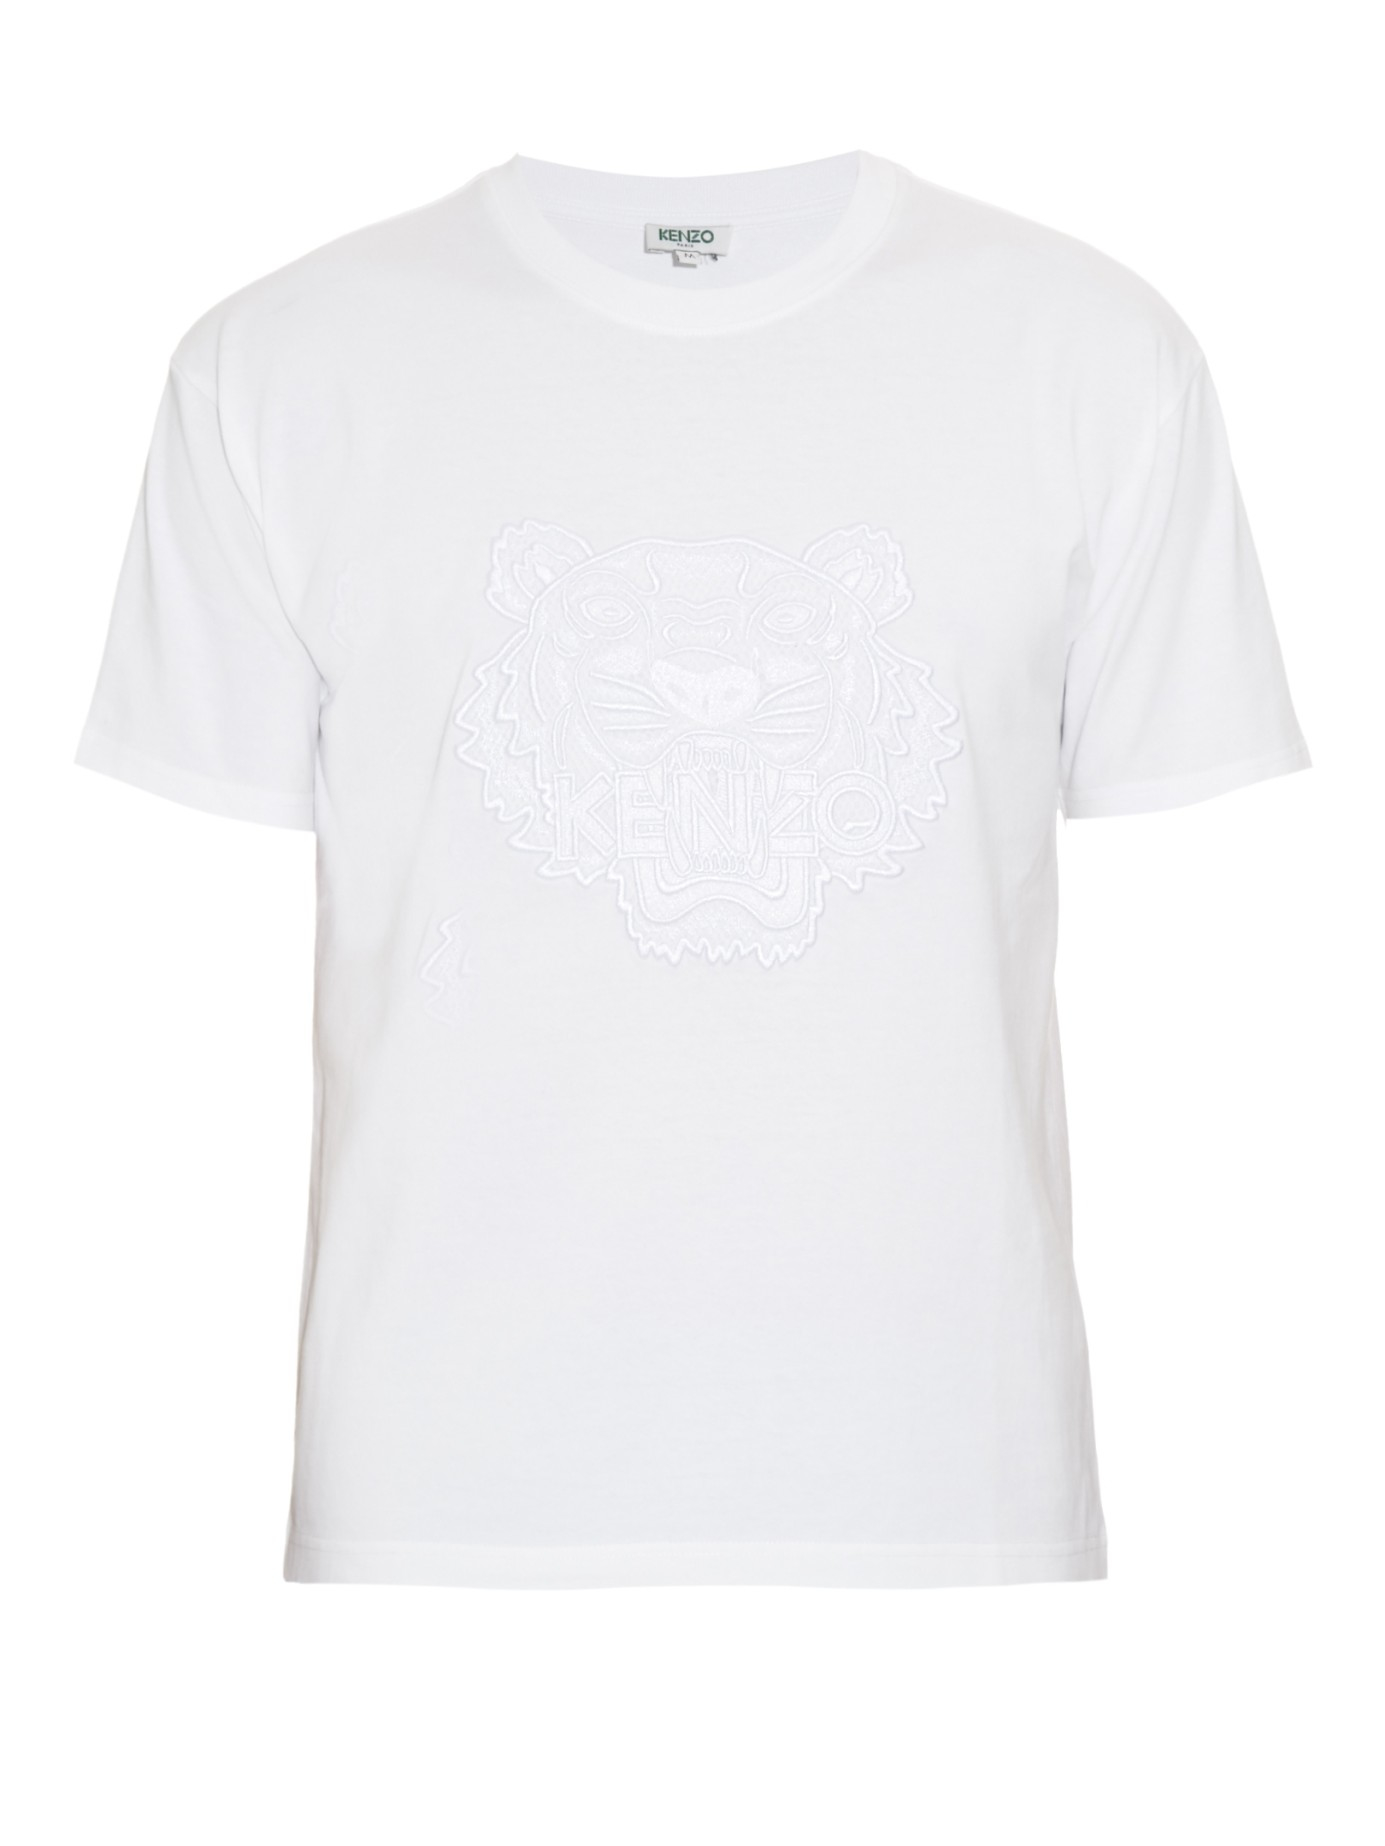 Lyst - Kenzo Embroidered Tiger-print Cotton T-shirt in White for Men